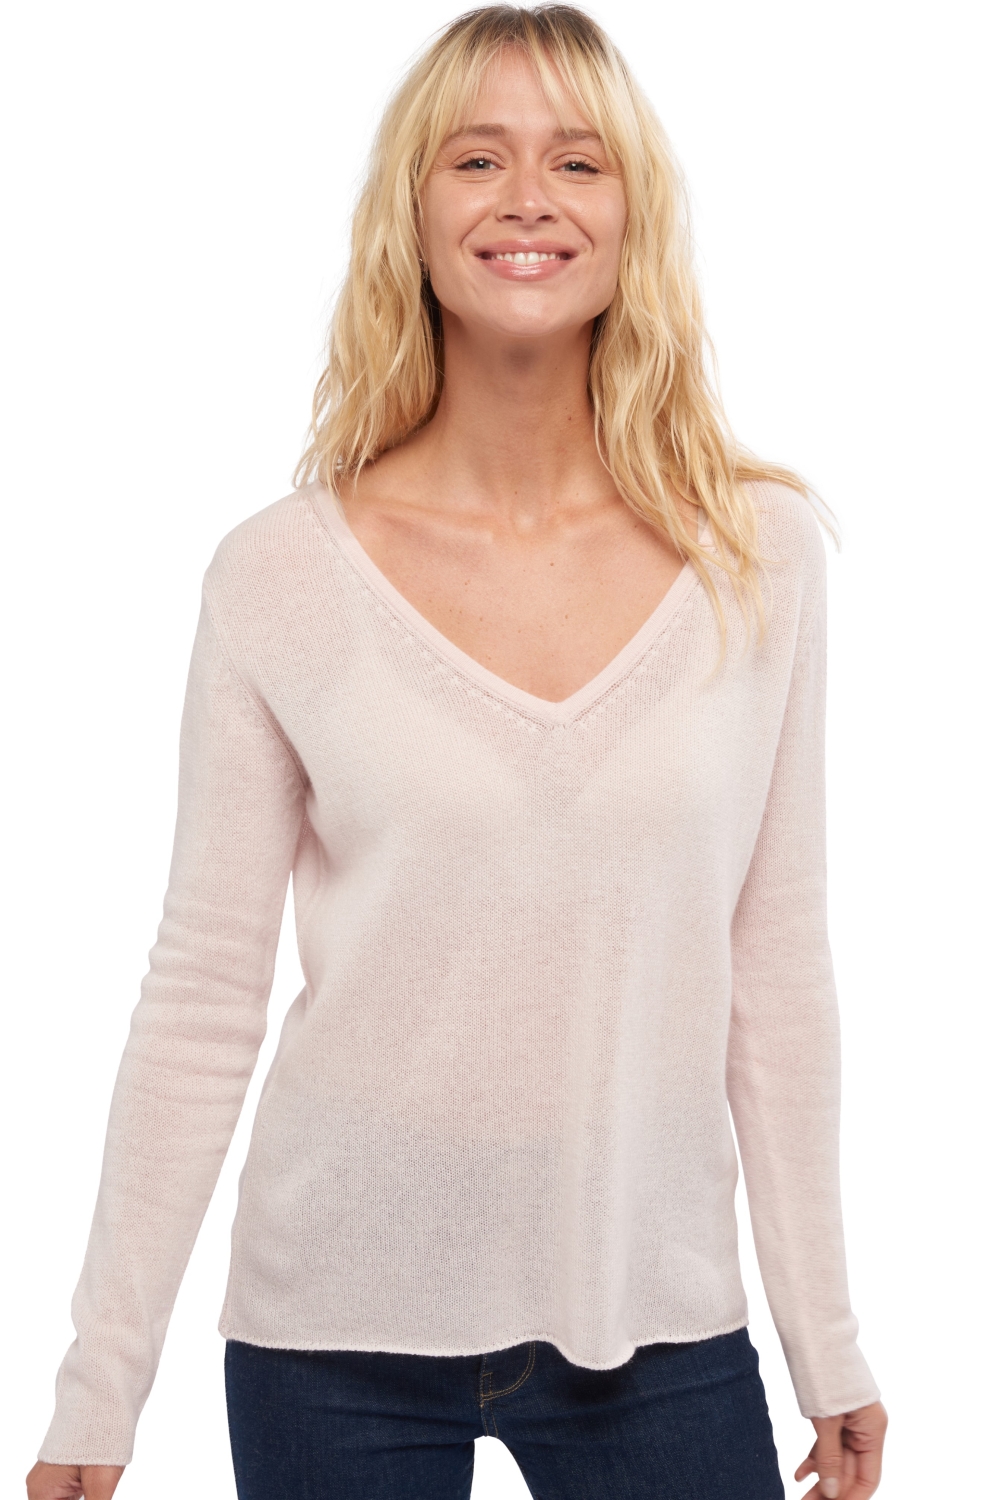 Cashmere ladies basic sweaters at low prices flavie shinking violet s